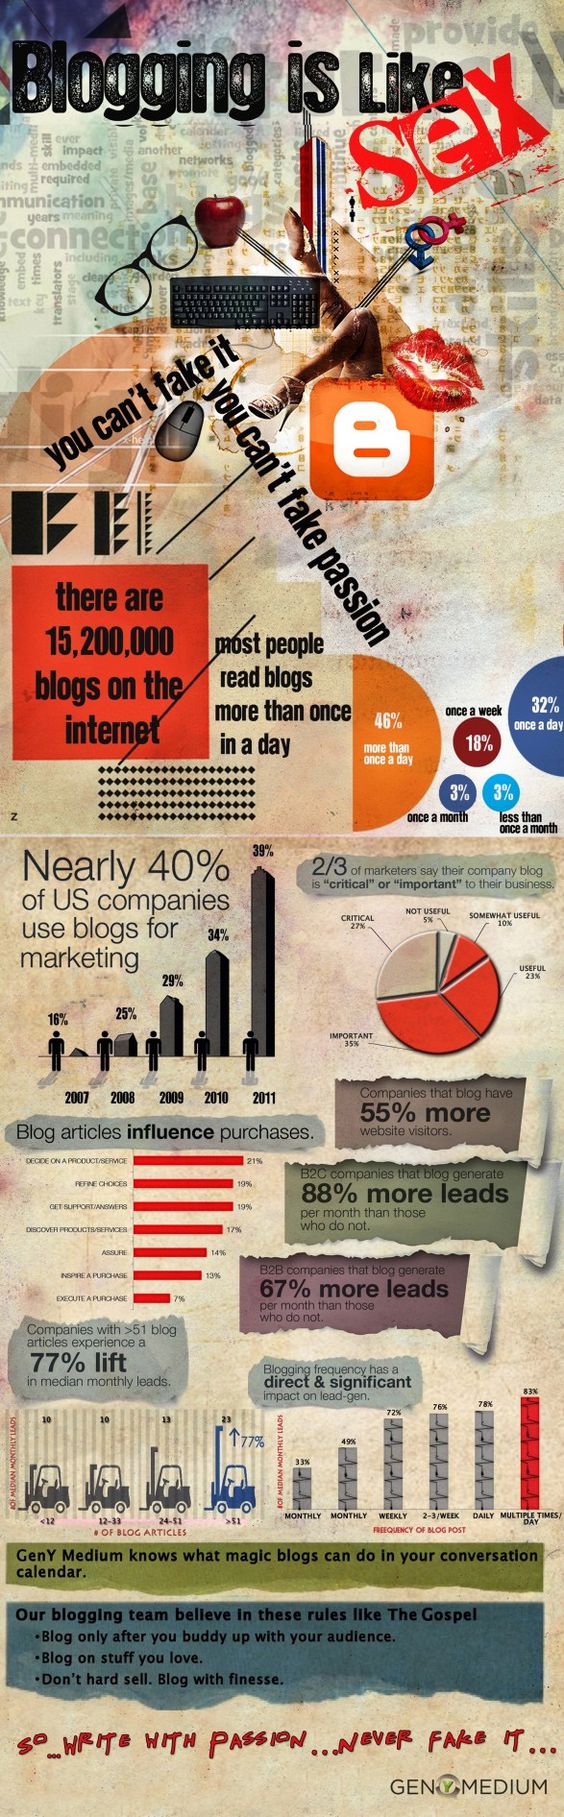 blog-for-business-infographic